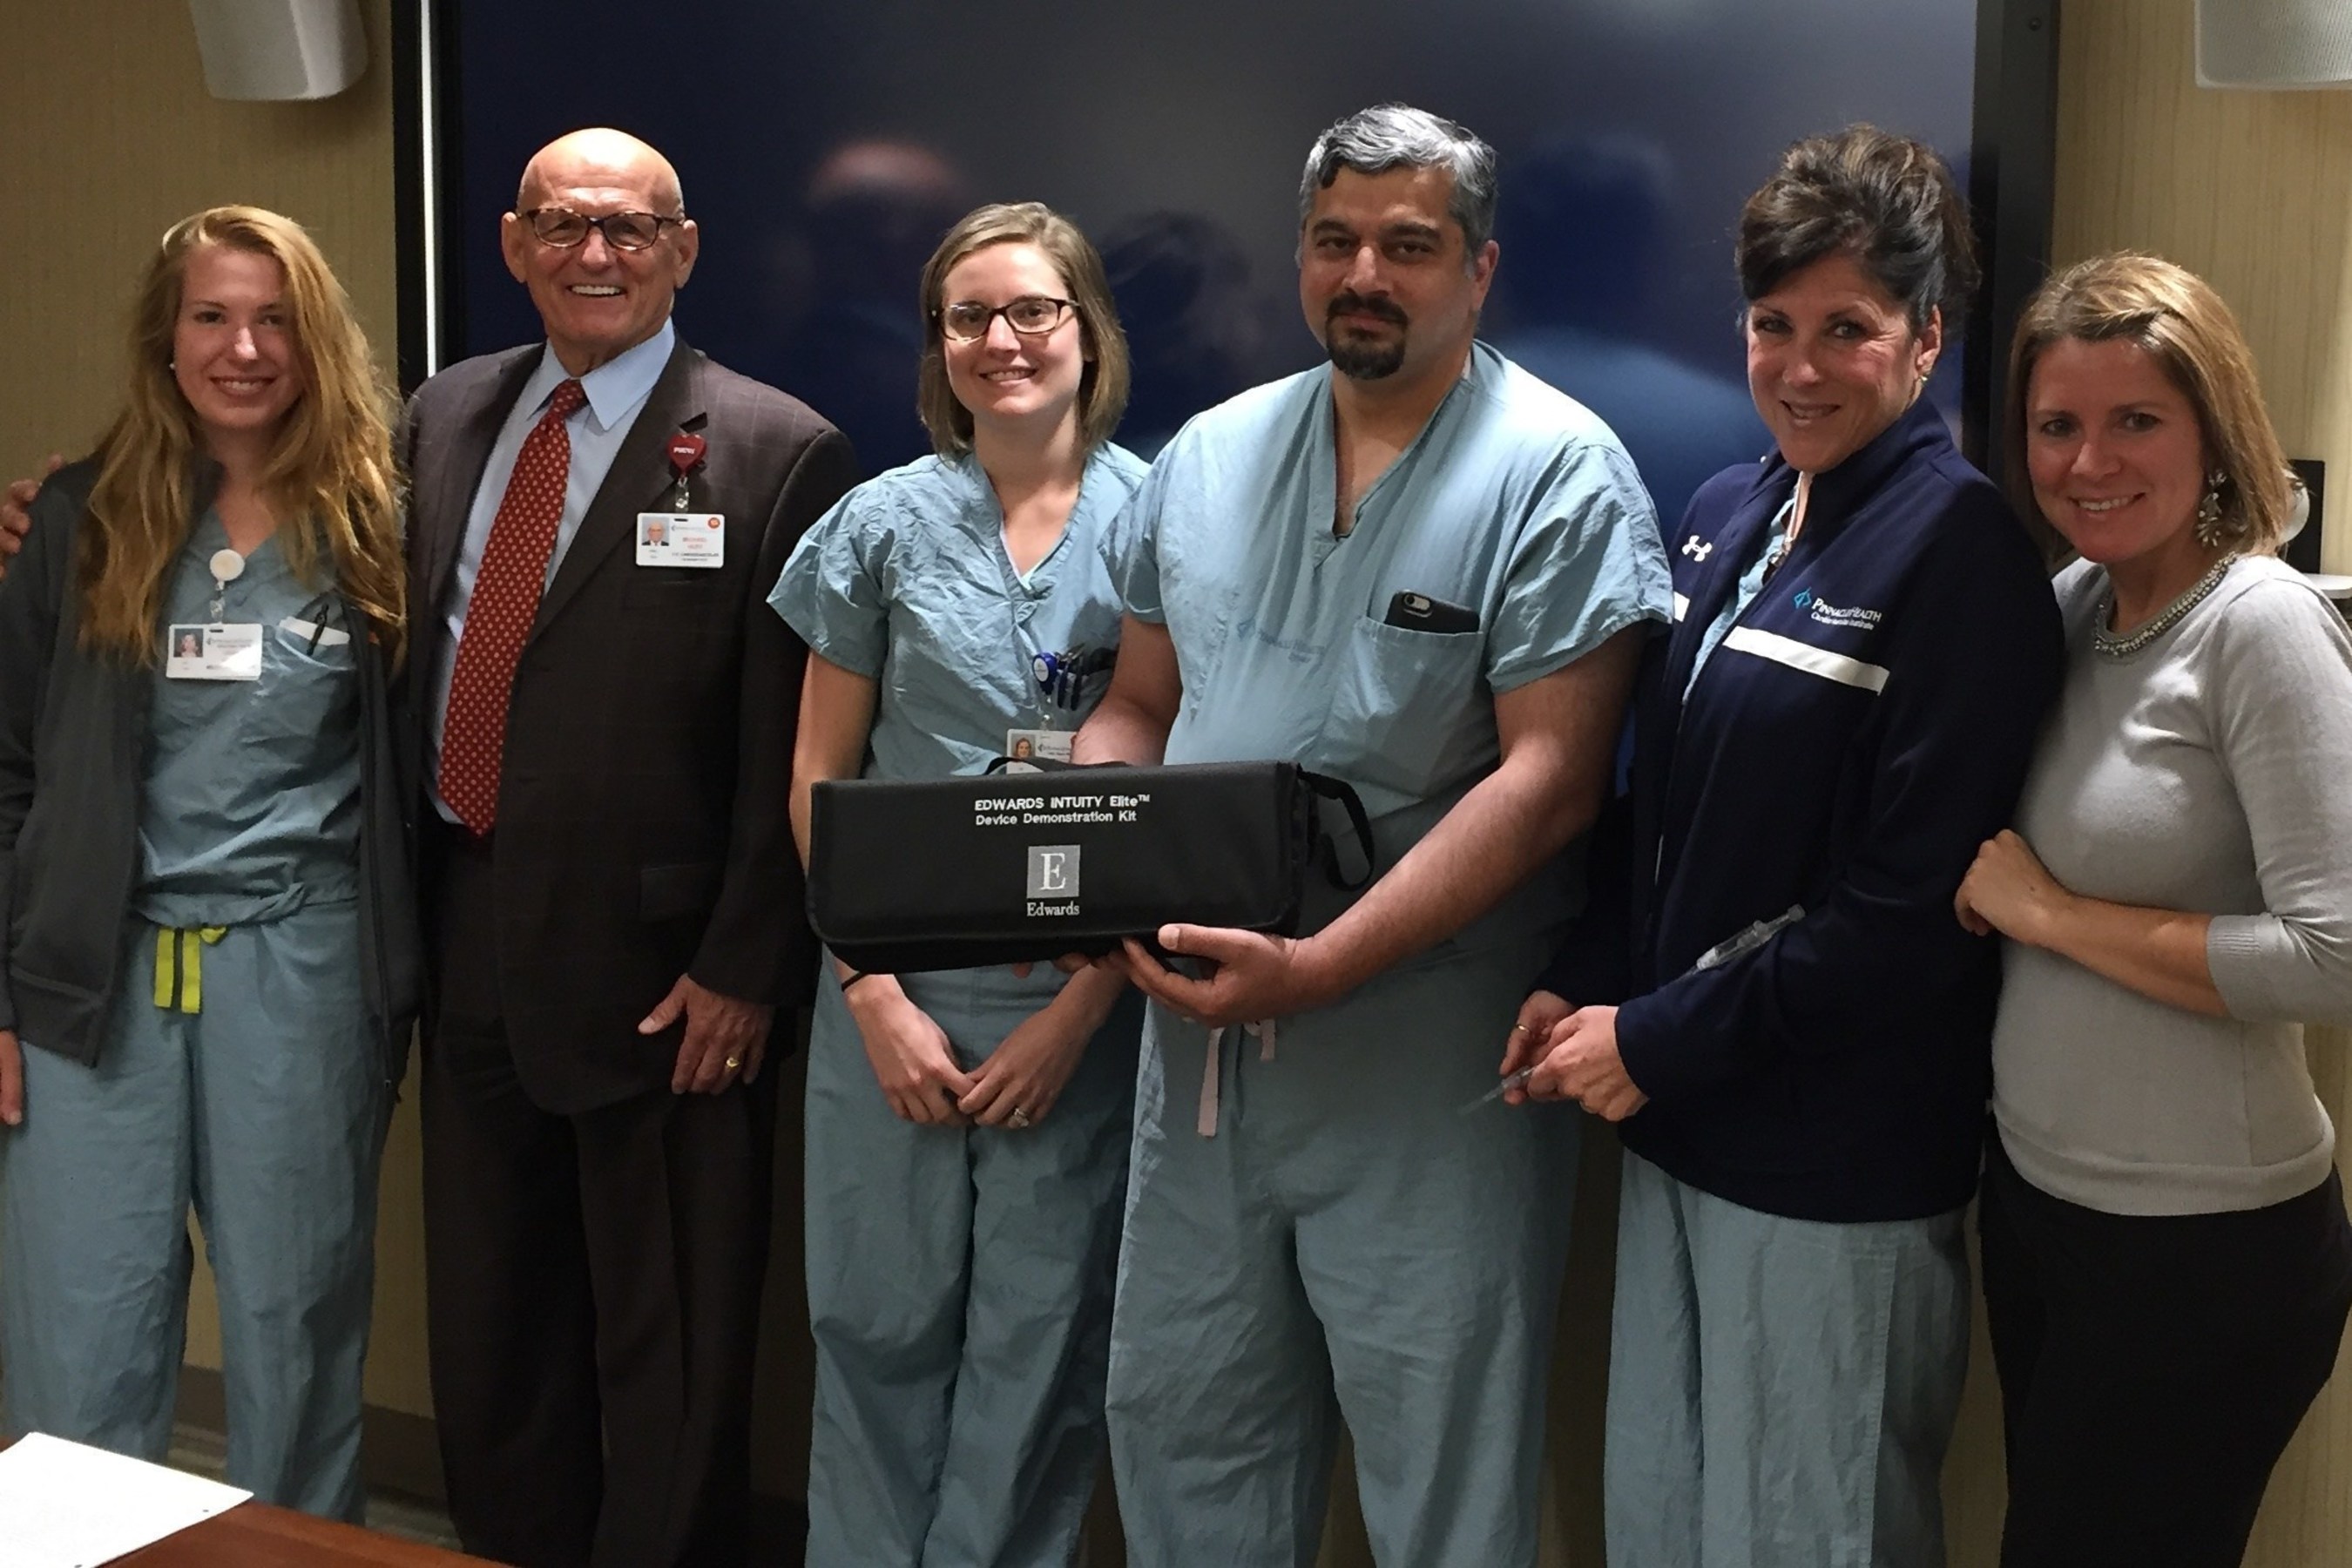 PinnacleHealth Team Pictured with the EDWARDS INTUITY Elite Device Demonstration Kit